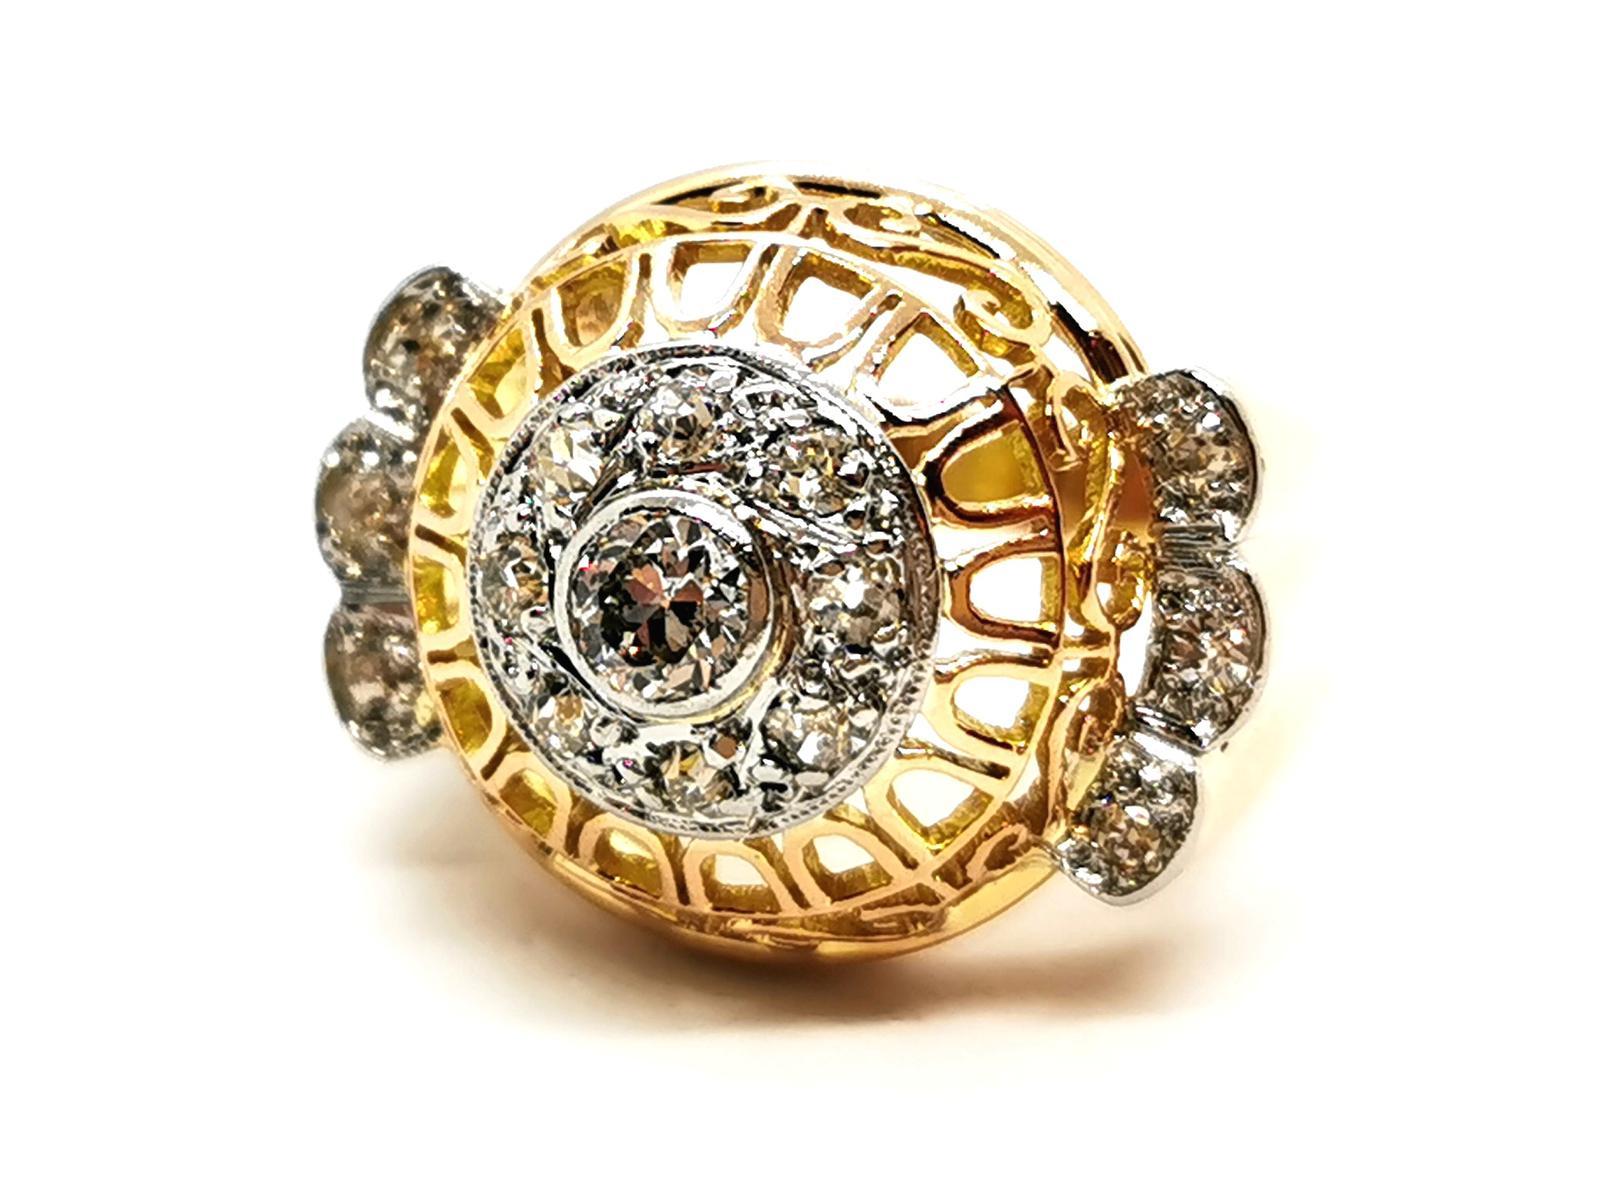 Diamond art deco ring. in 750 thousandths (18 carat) yellow gold and 950 thousandth platinum. openwork curved pattern on top. godronné ring coprs. set in the center on platinum. of a brilliant cut diamond. of about 0.33 ct. supported by 14 antique